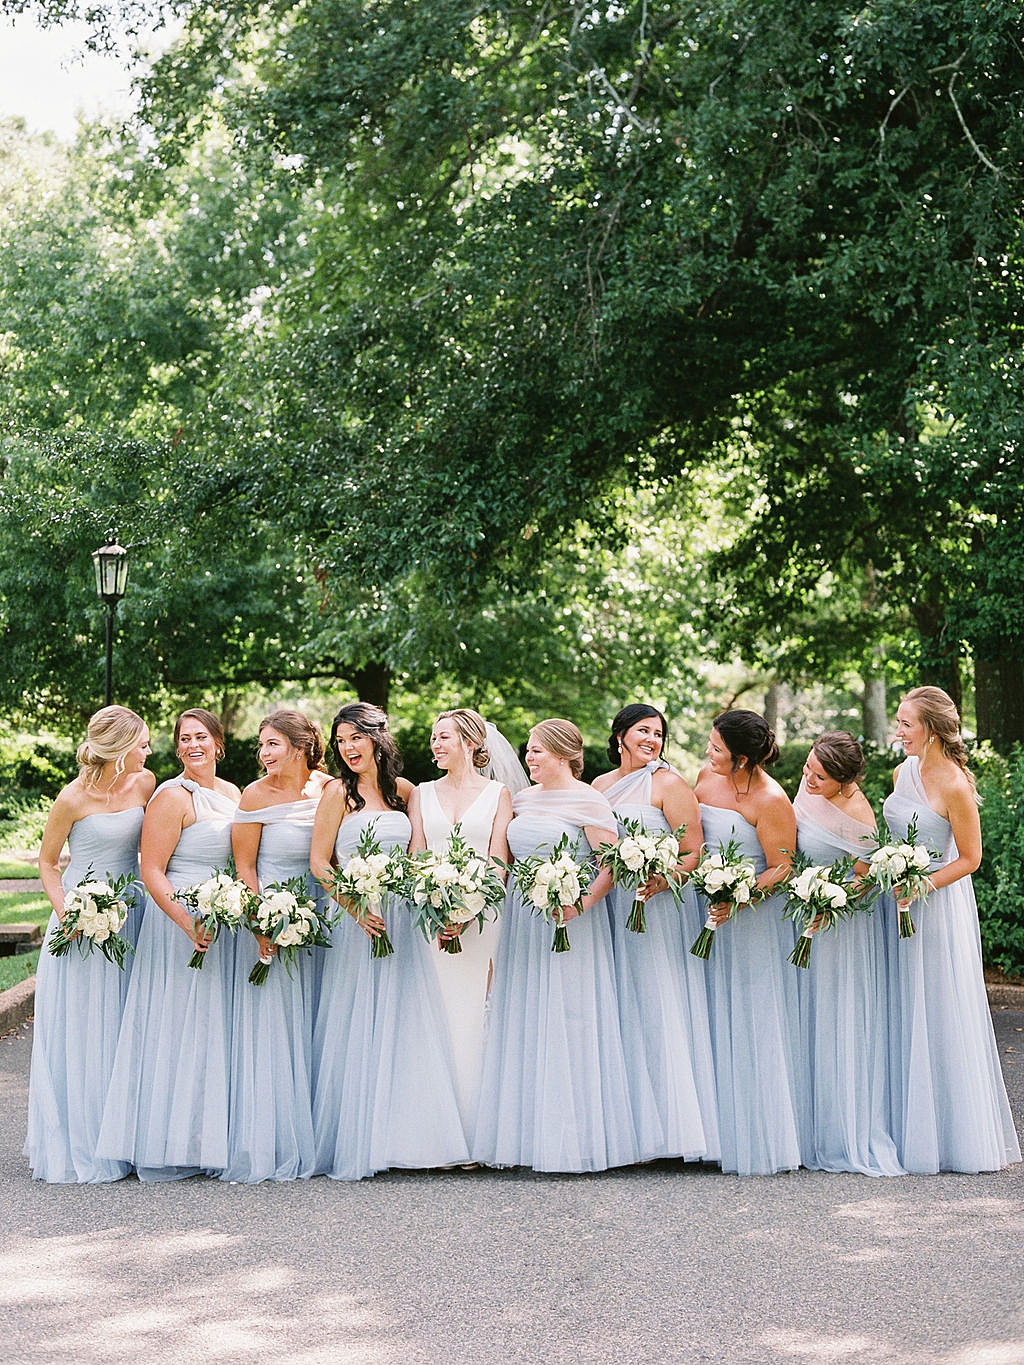 Bridesmaids in dusty blue